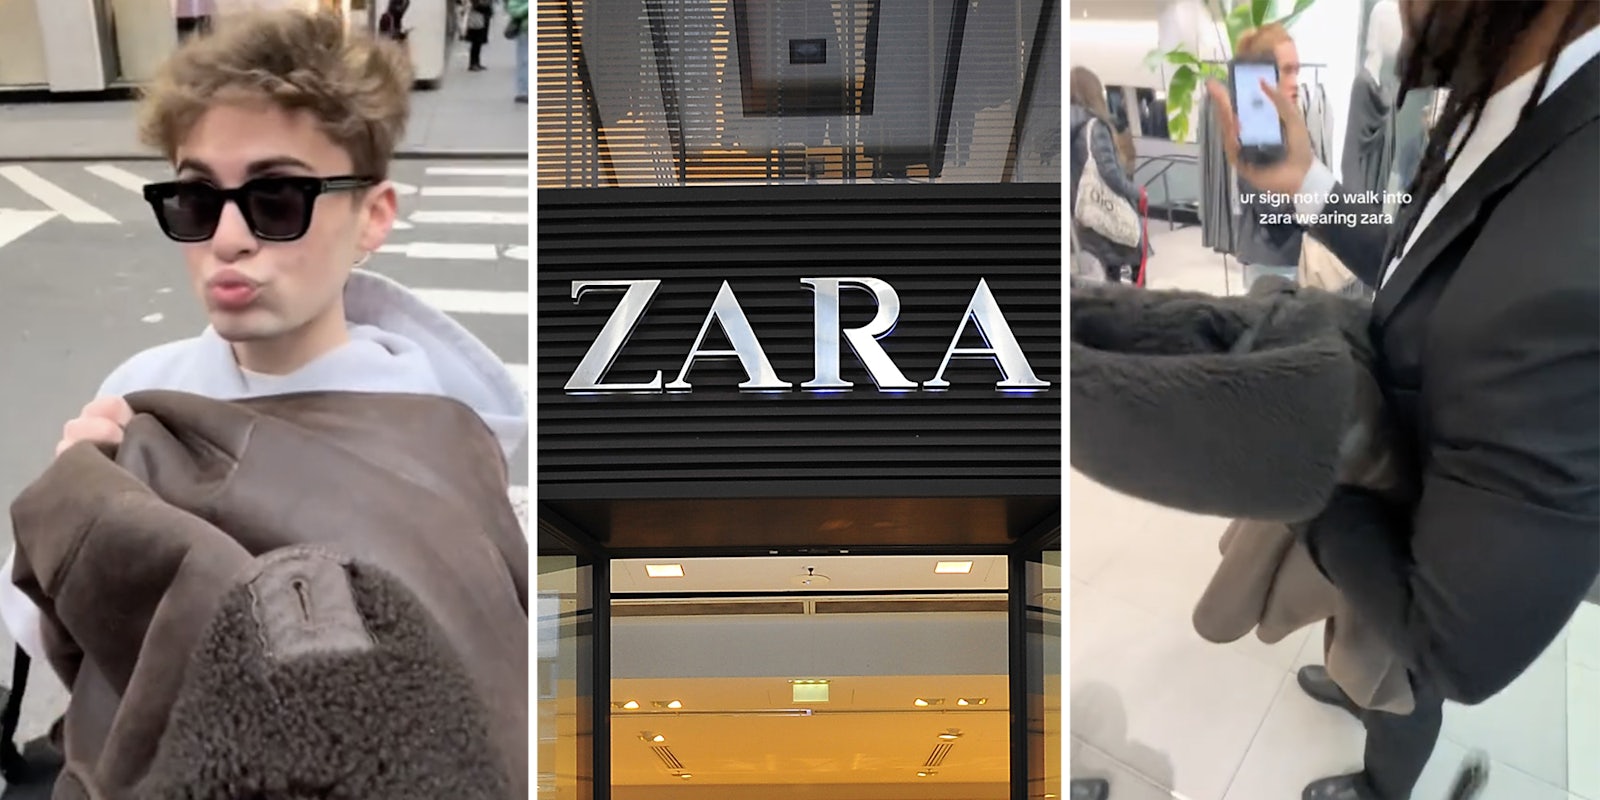 Man with coat(l), Zara storefront(c), Security guard with jacker(r)